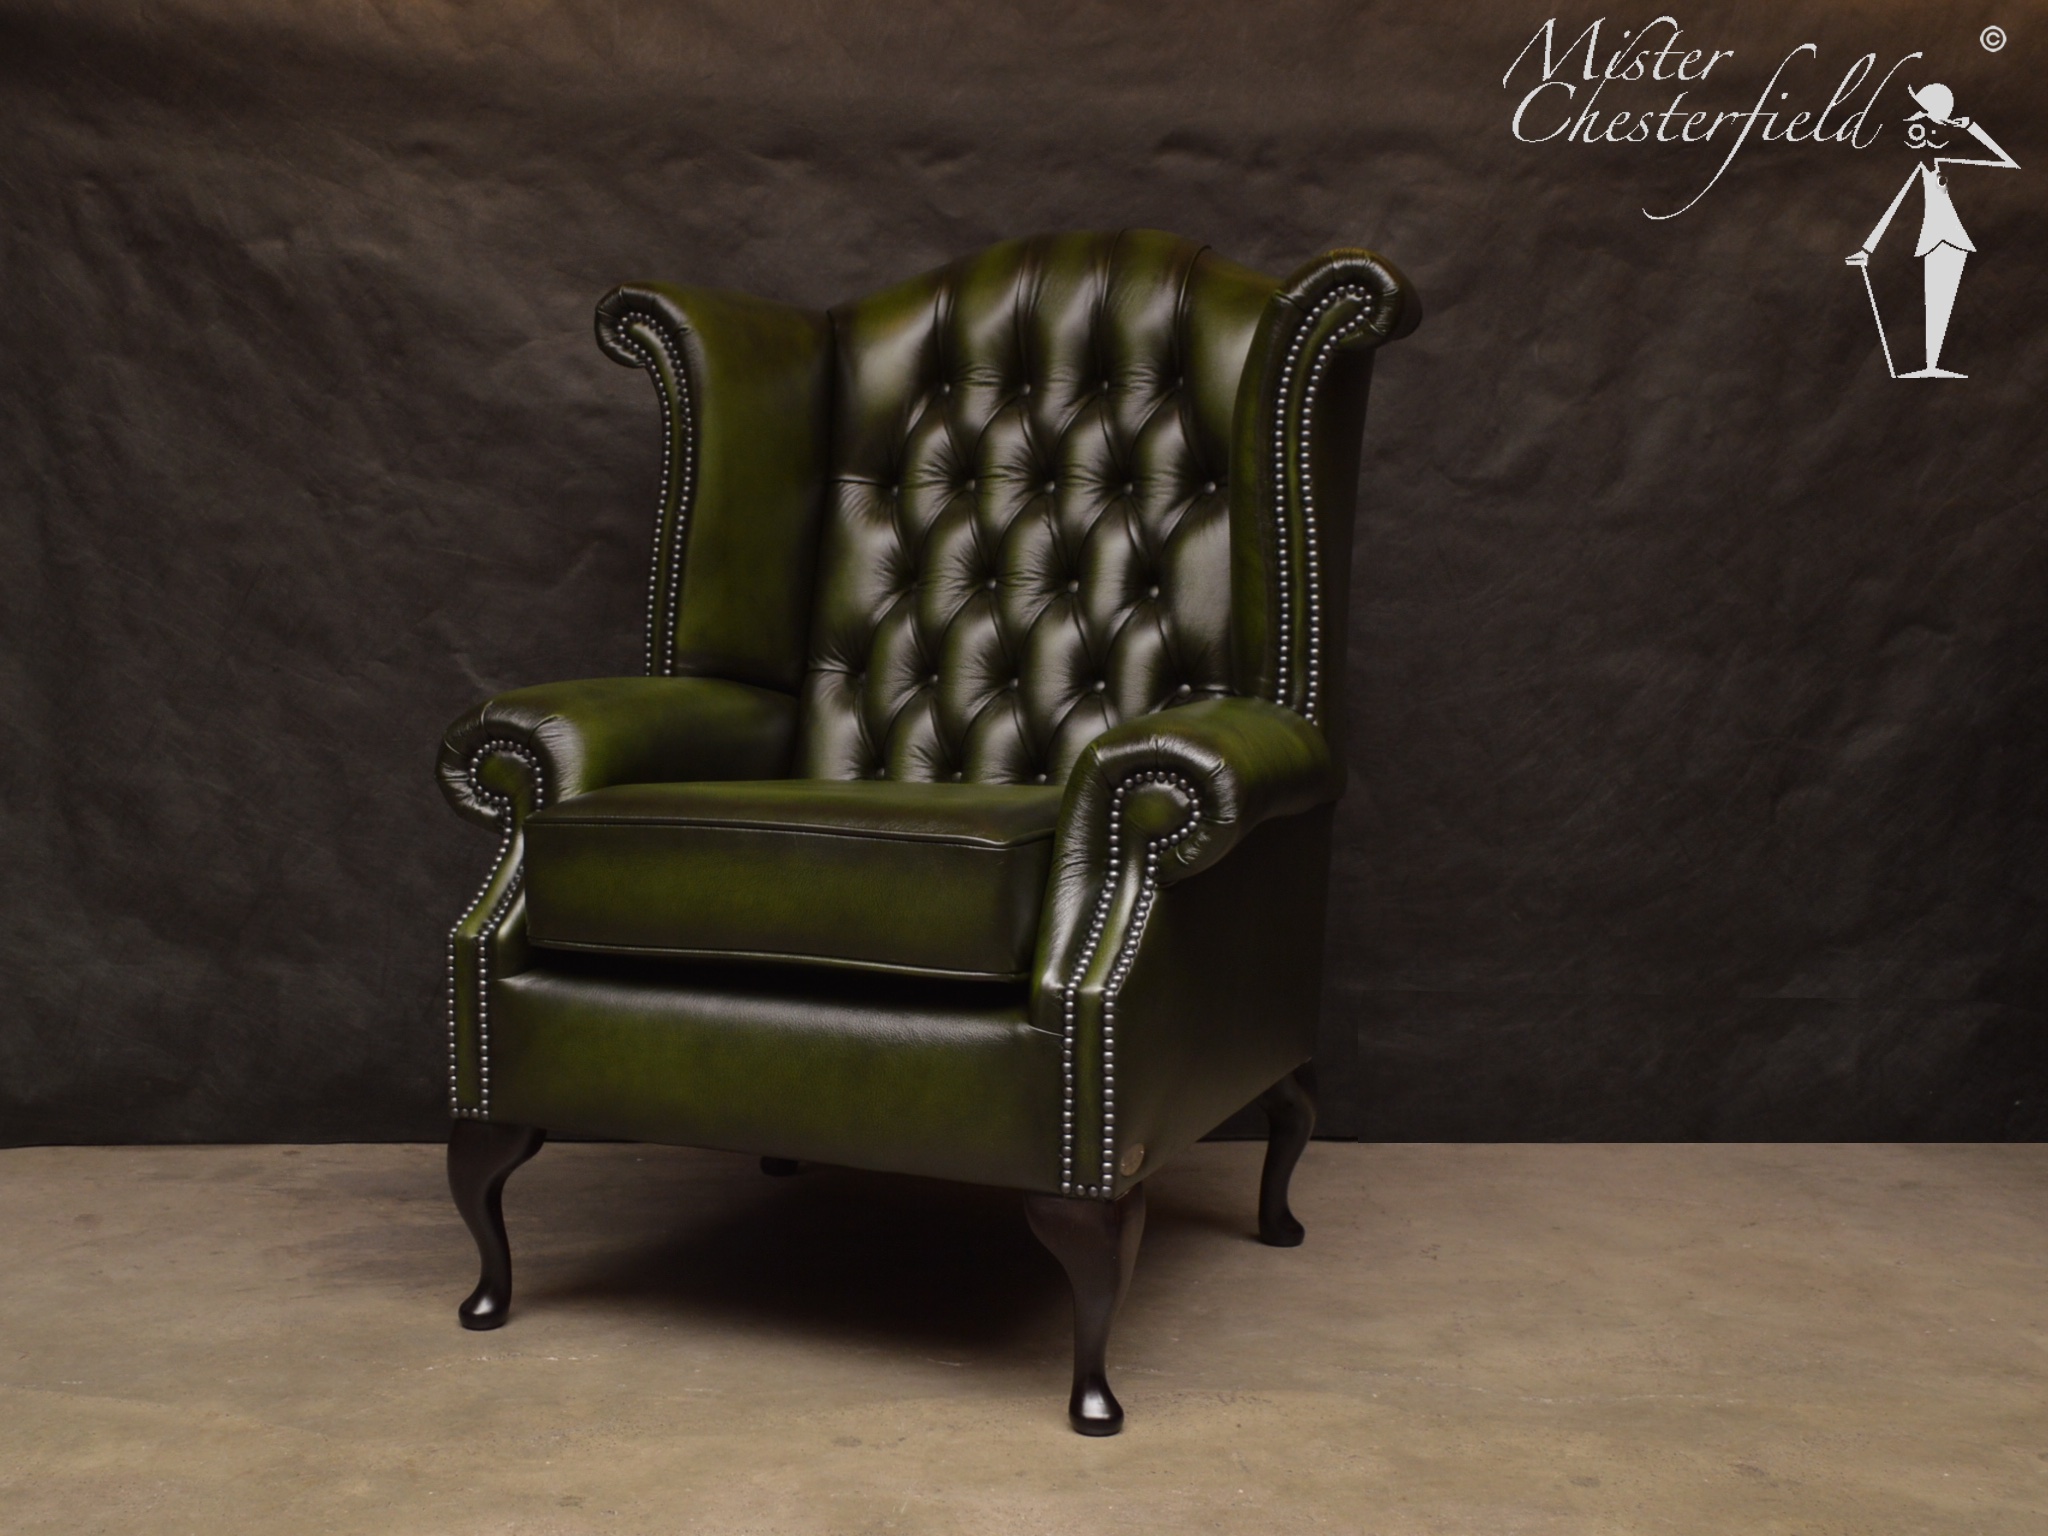 Chesterfield 89cm Scroll Chair In Green Direct Leverbaar Mister